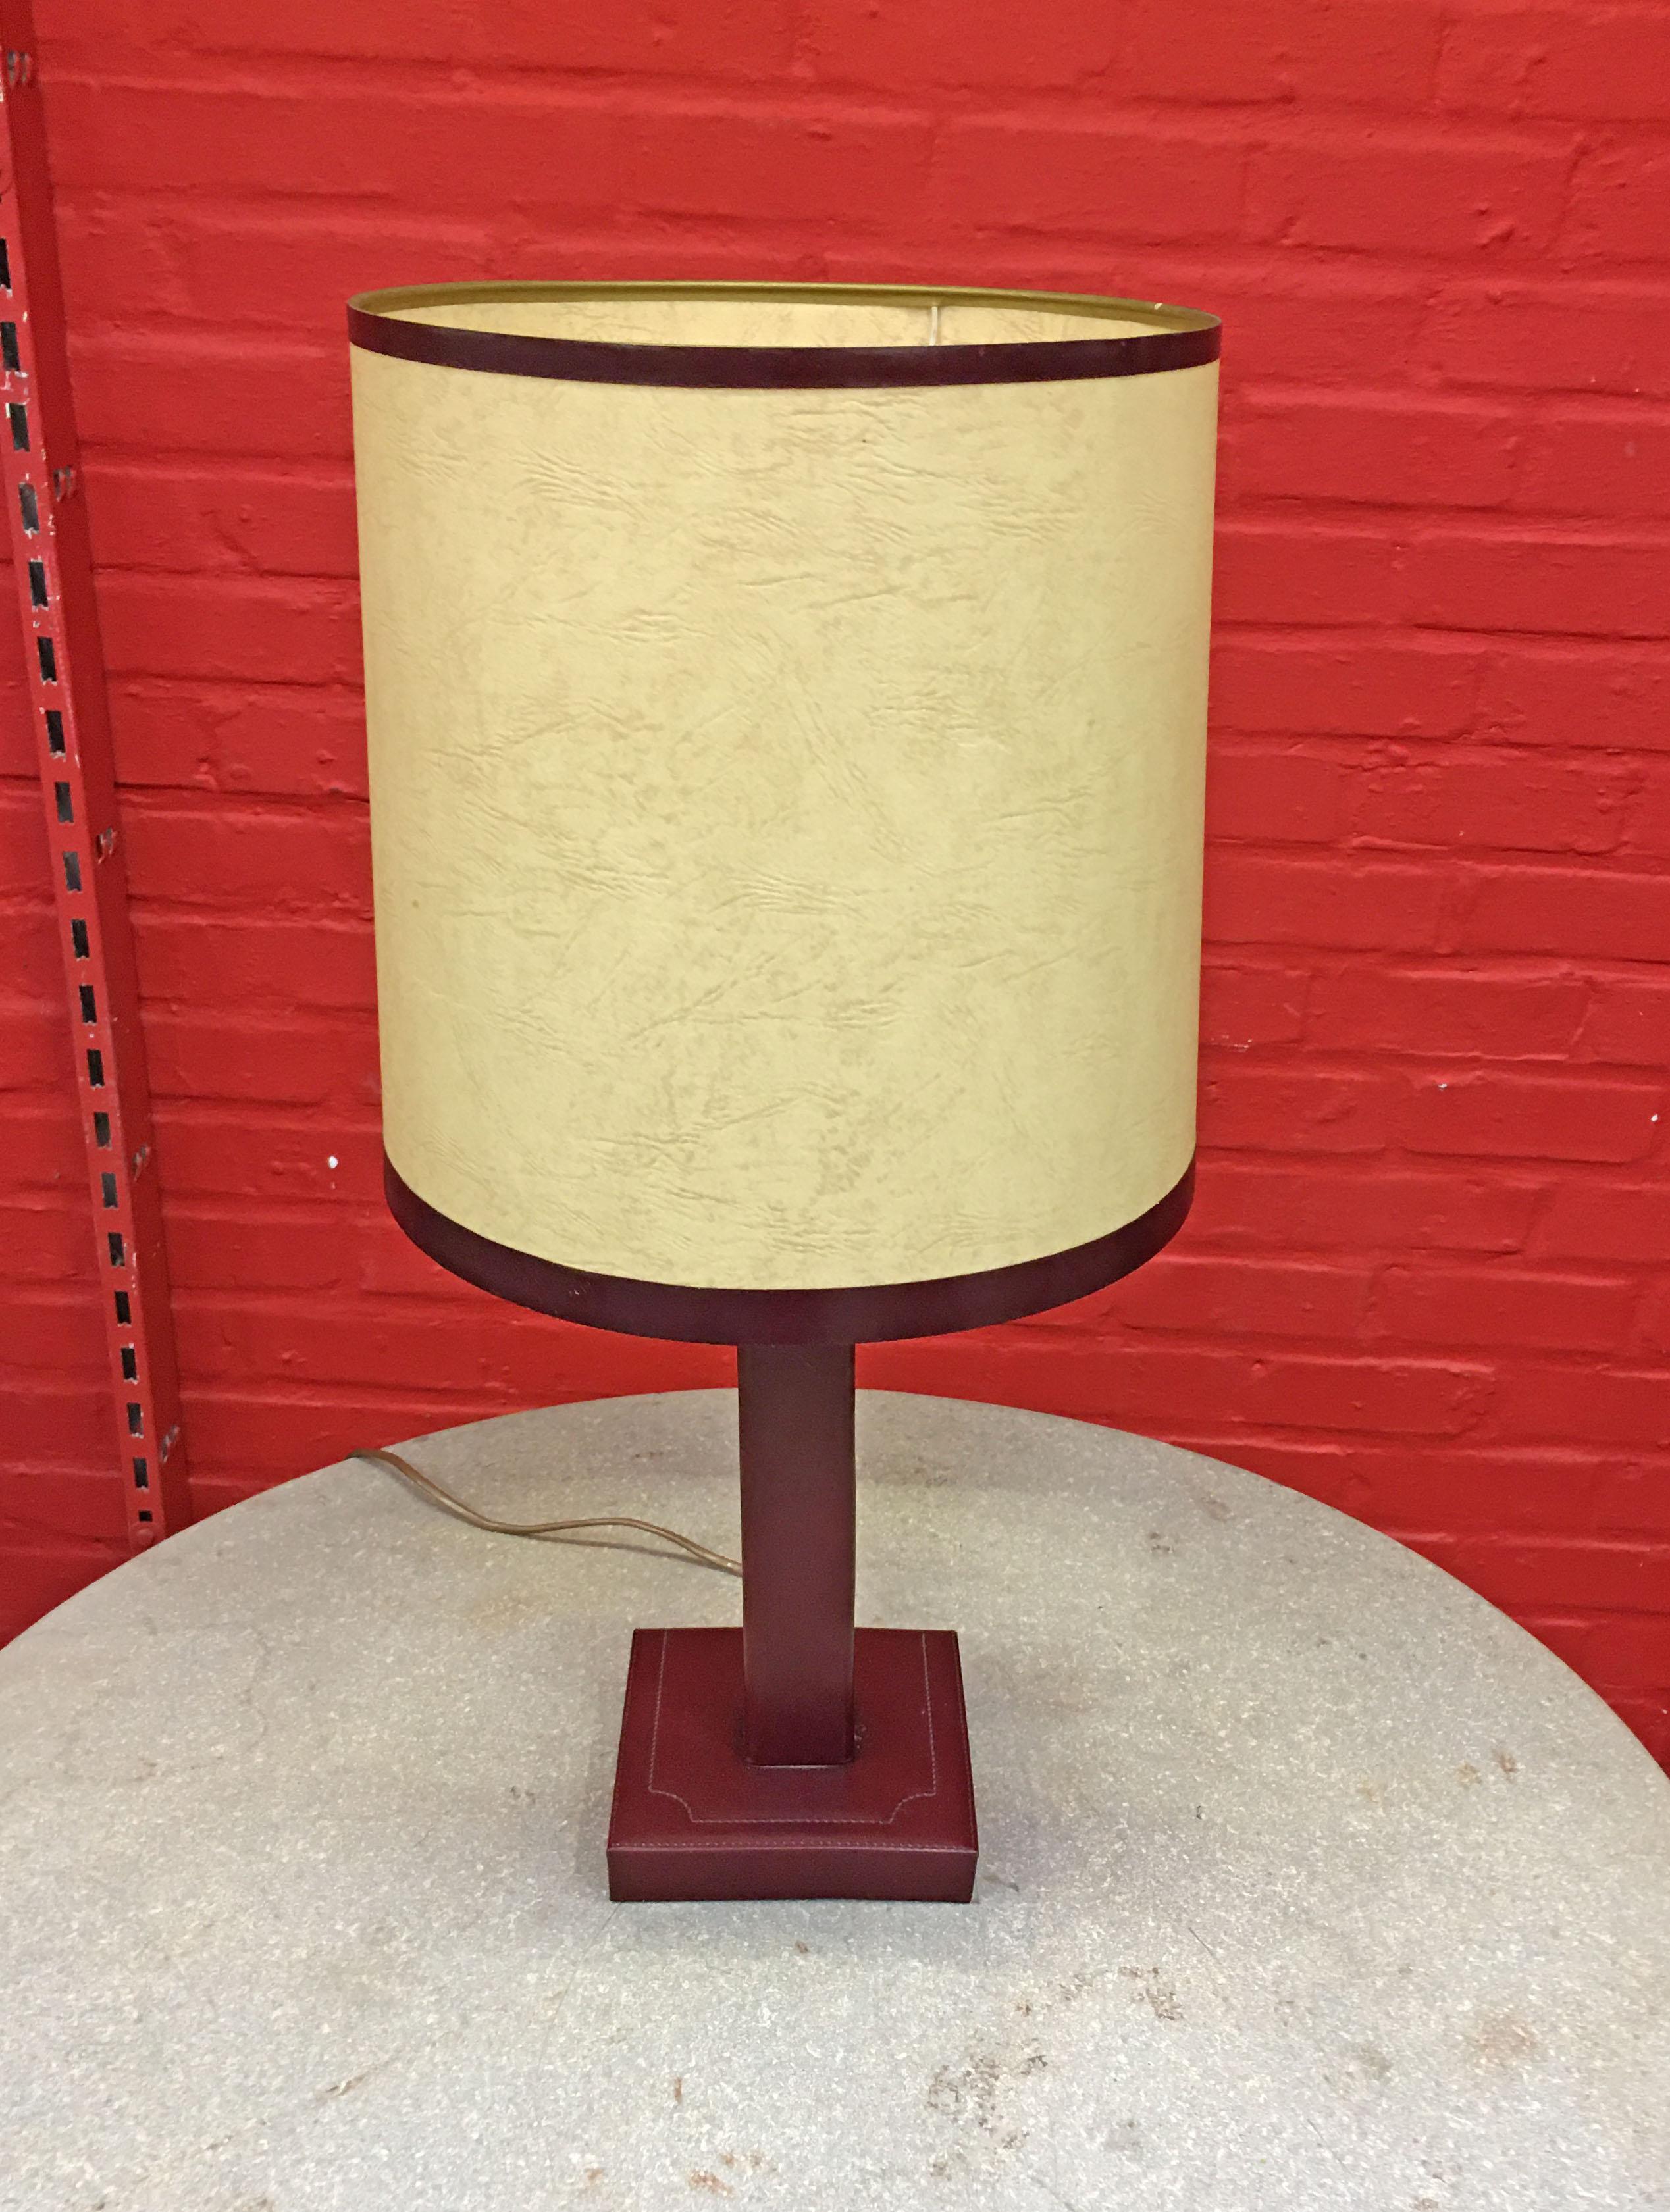 Leather lamp in the style of Jacques Adnet, circa 1950, original lampshade in good condition
signed ' Le Tanneur'.